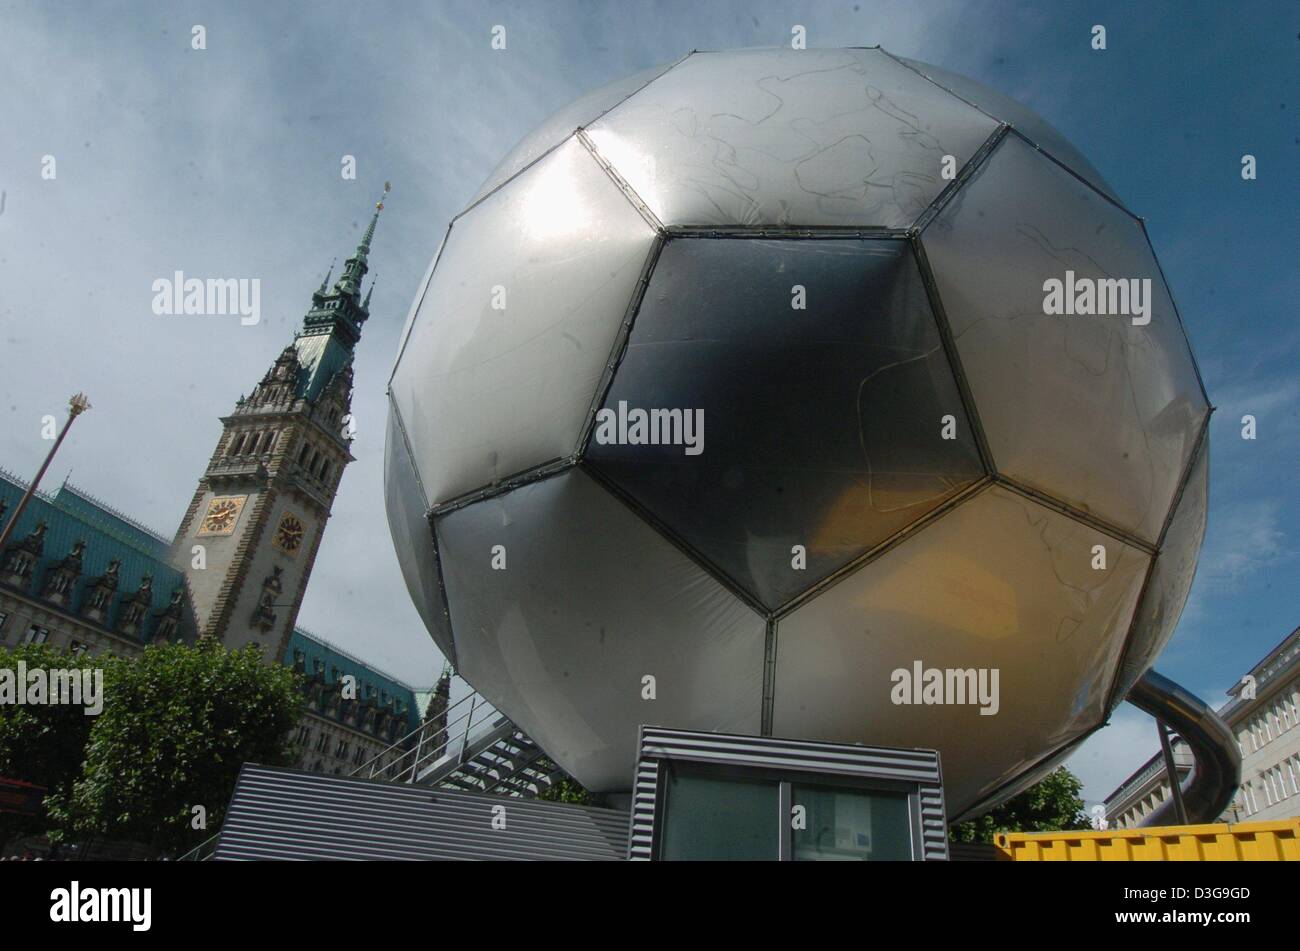 (dpa) - View of a globe in the shape of a soccer ball designed by Andre Heller as a promotional tool leading up to the FIFA Soccer World Cup 2006 in Germany. The globe, which will visit all 12 German World Cup host cities, opened for visitors in front of the city hall in Hamburg, Germany, 31 August 2004. The 20-meter-high structure offers several cultural and sports related events. Stock Photo